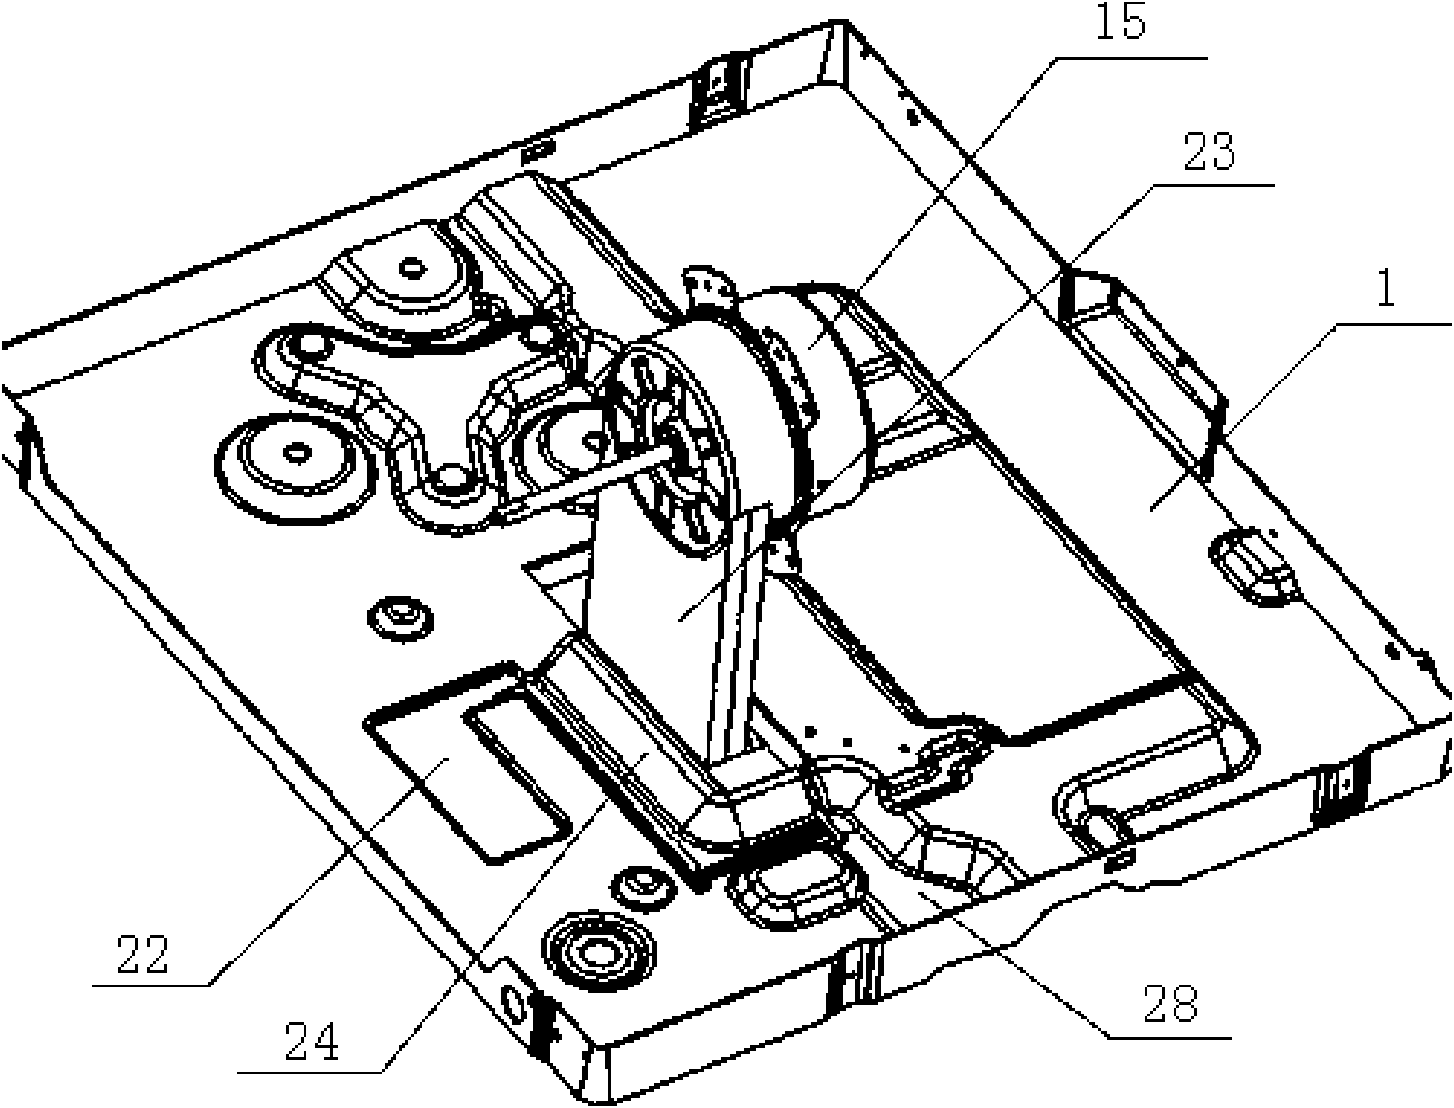 Motor radiating structure of window air conditioner